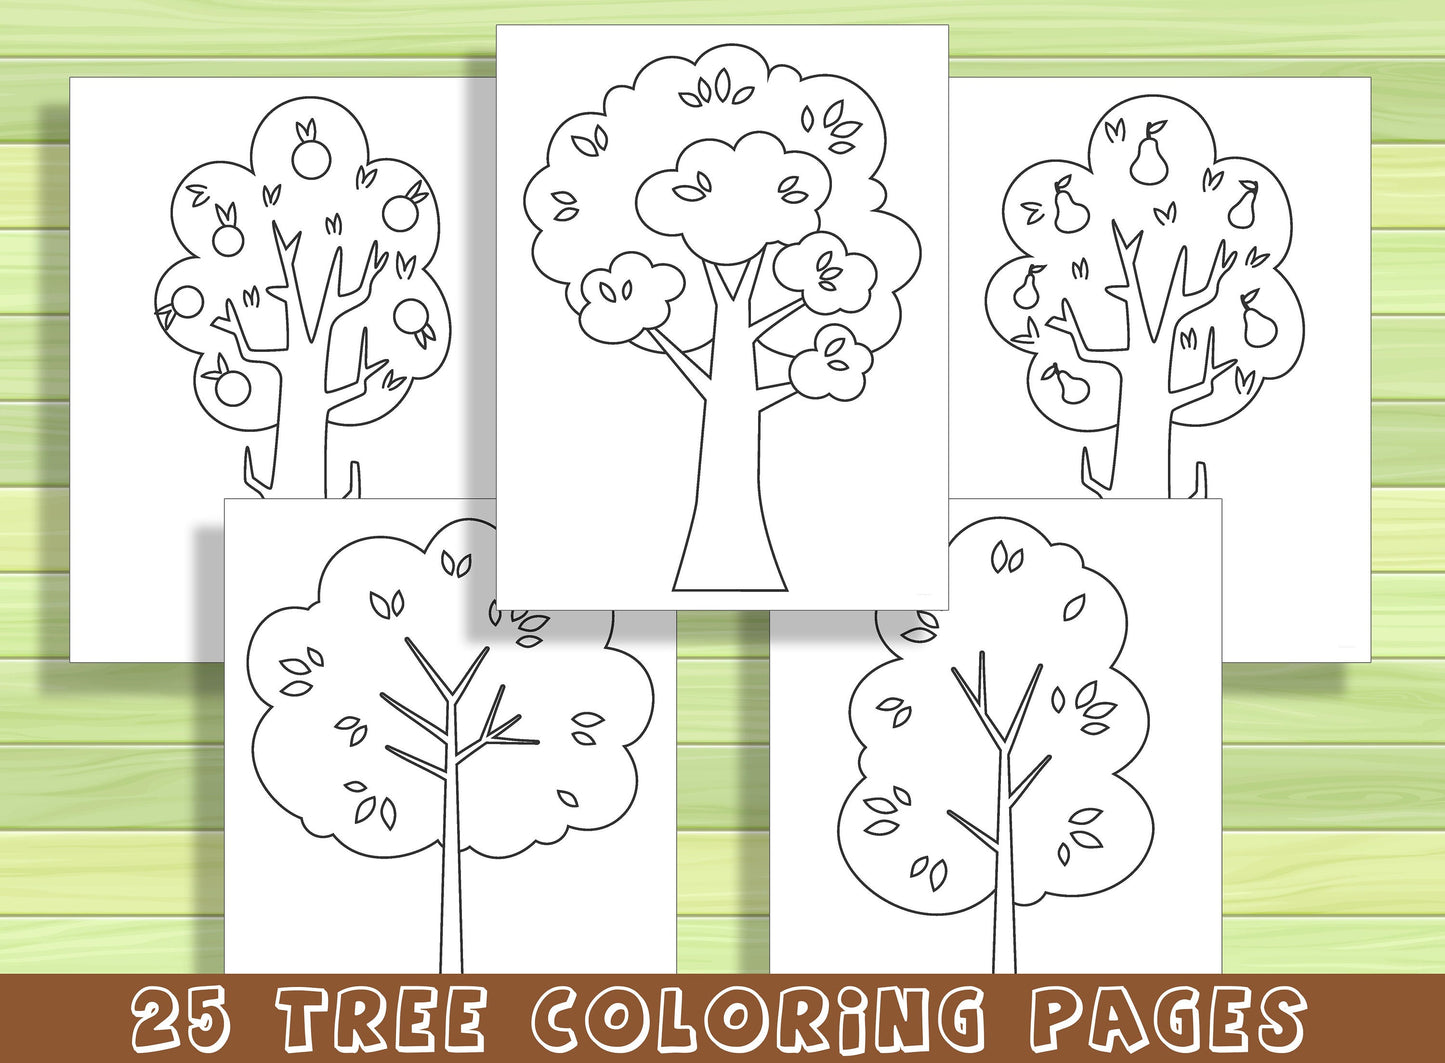 25 Beautiful Tree Coloring Pages for Preschool and Kindergarten, PDF File, Instant Download